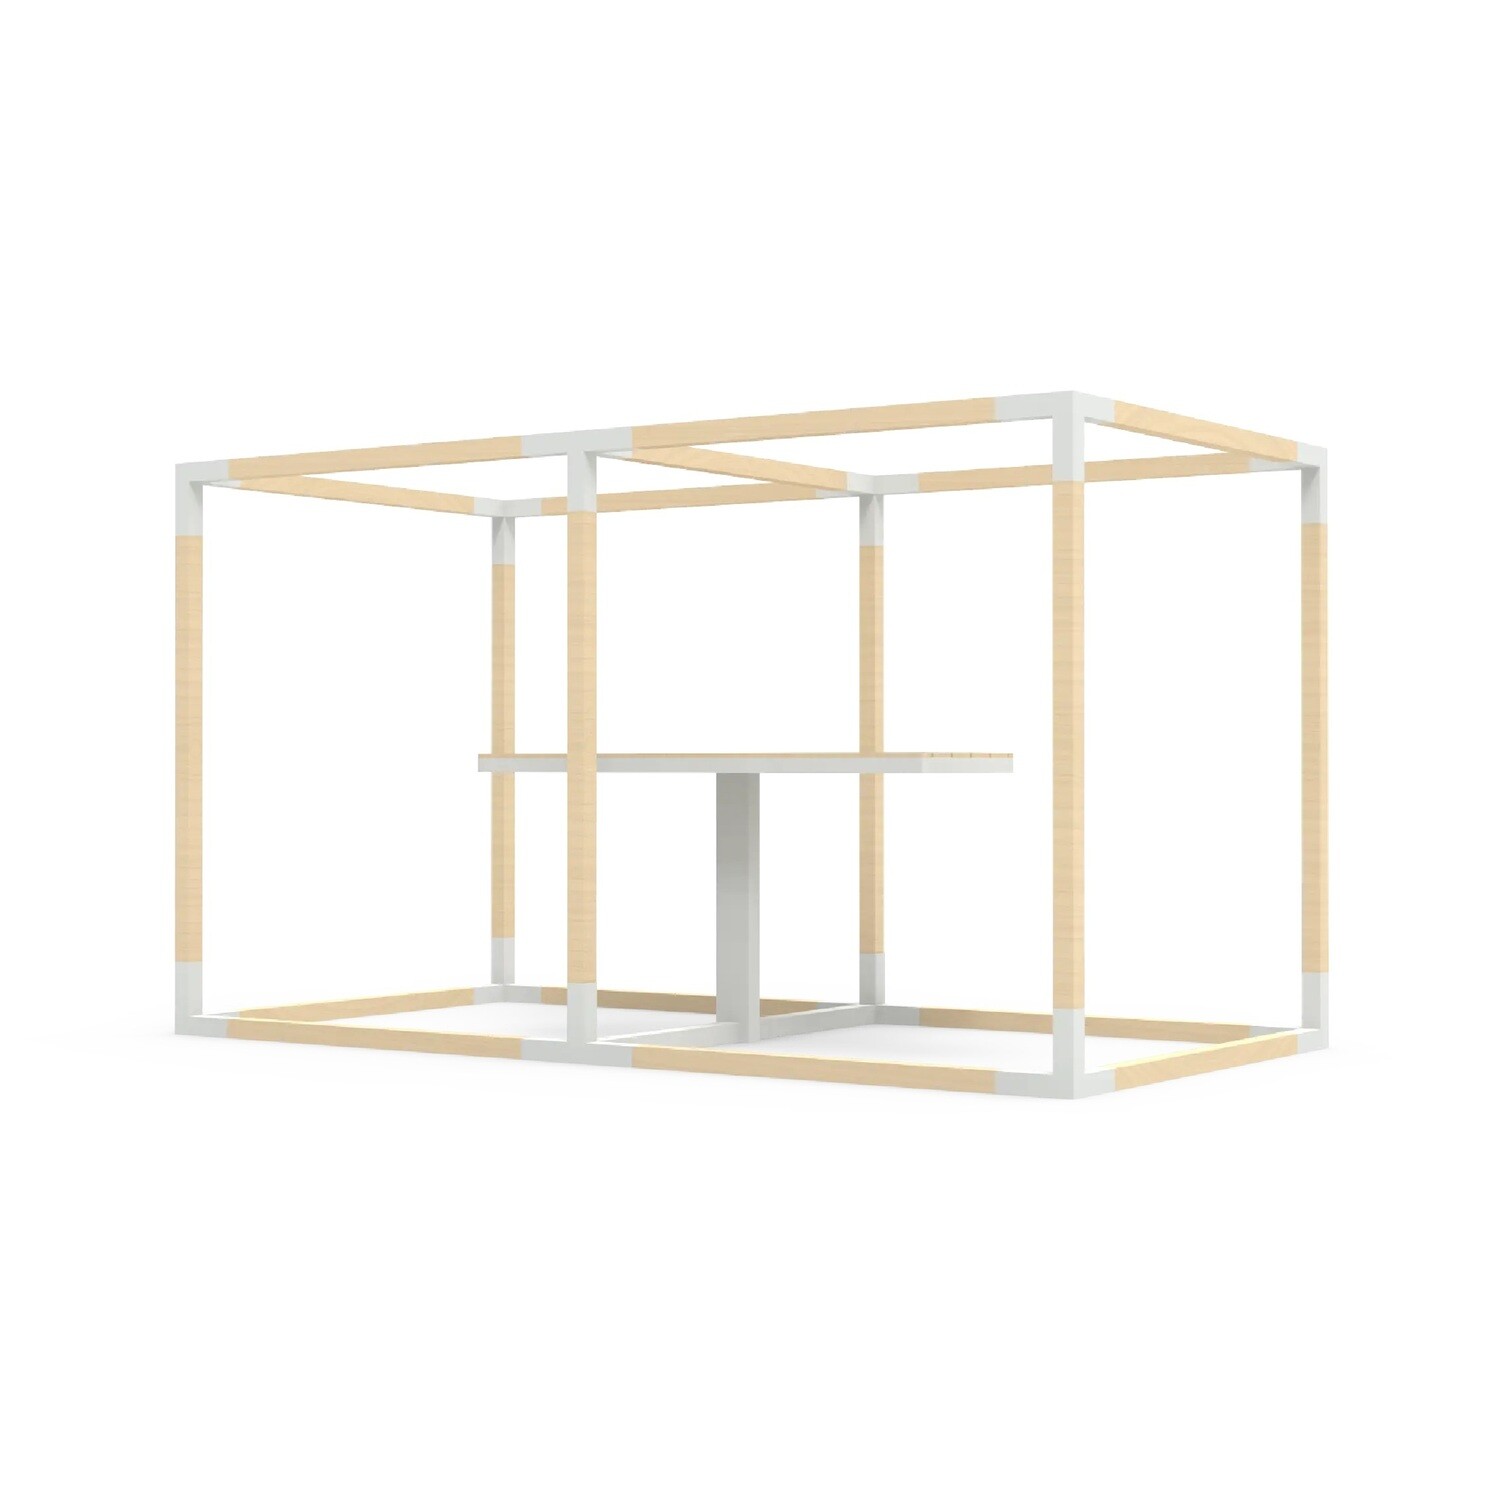 DINING TABLE FOR TWO CUBES - HIGH  - Modular System LEVA (ACCESSORY)